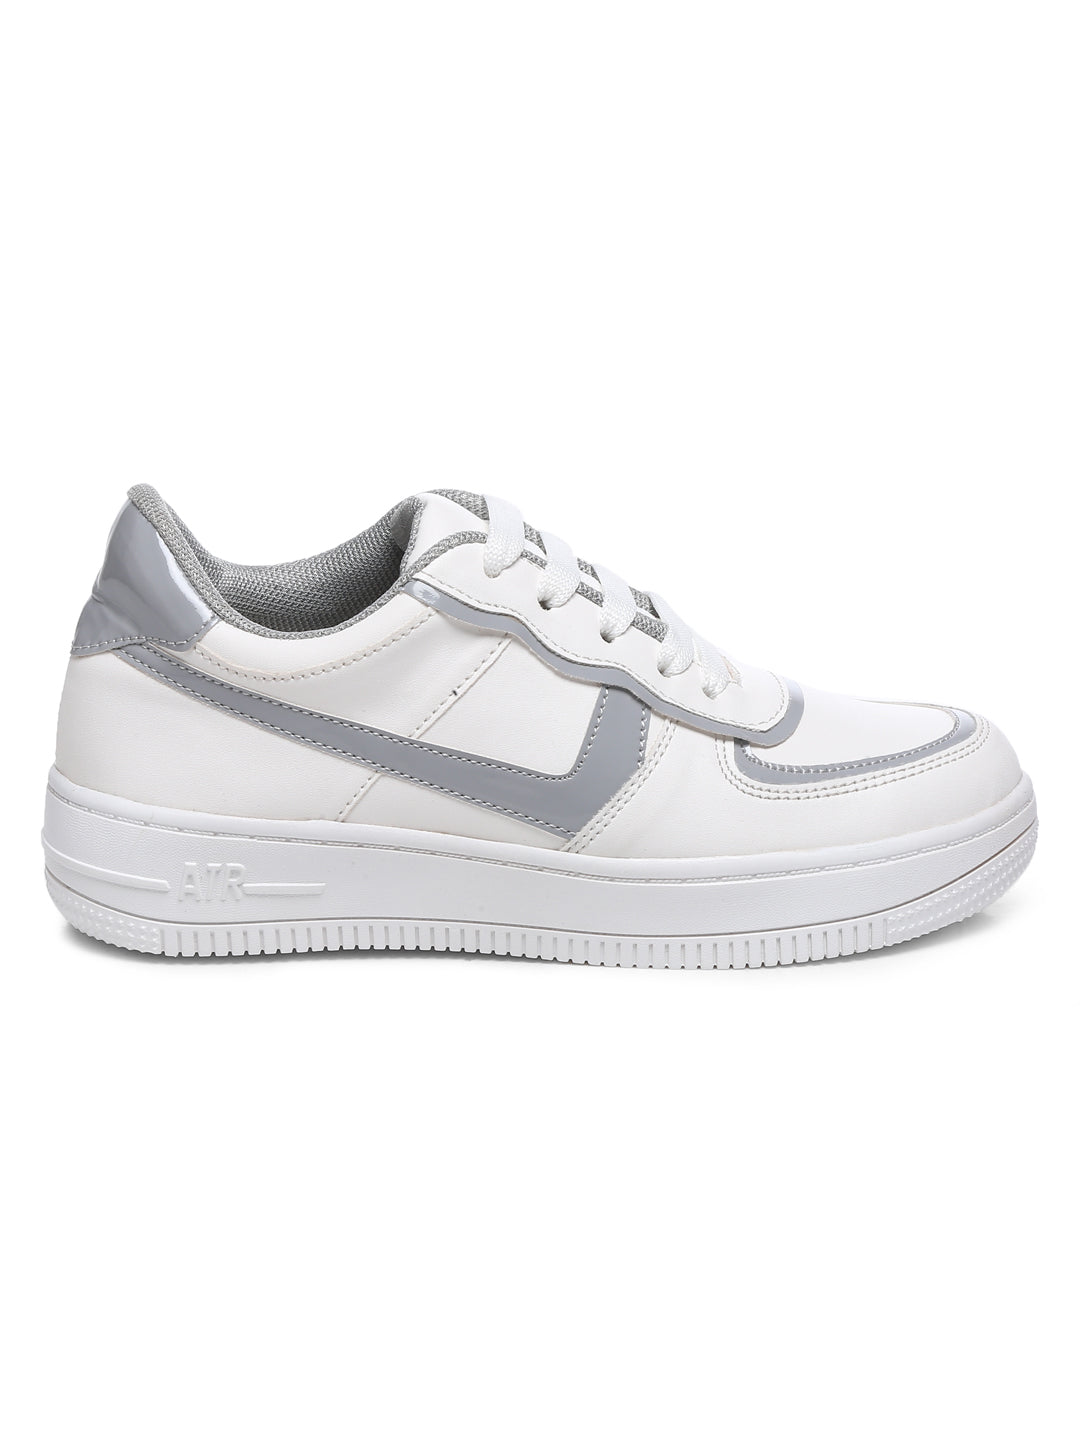 GNIST White Grey Colour Blocked Sneakers